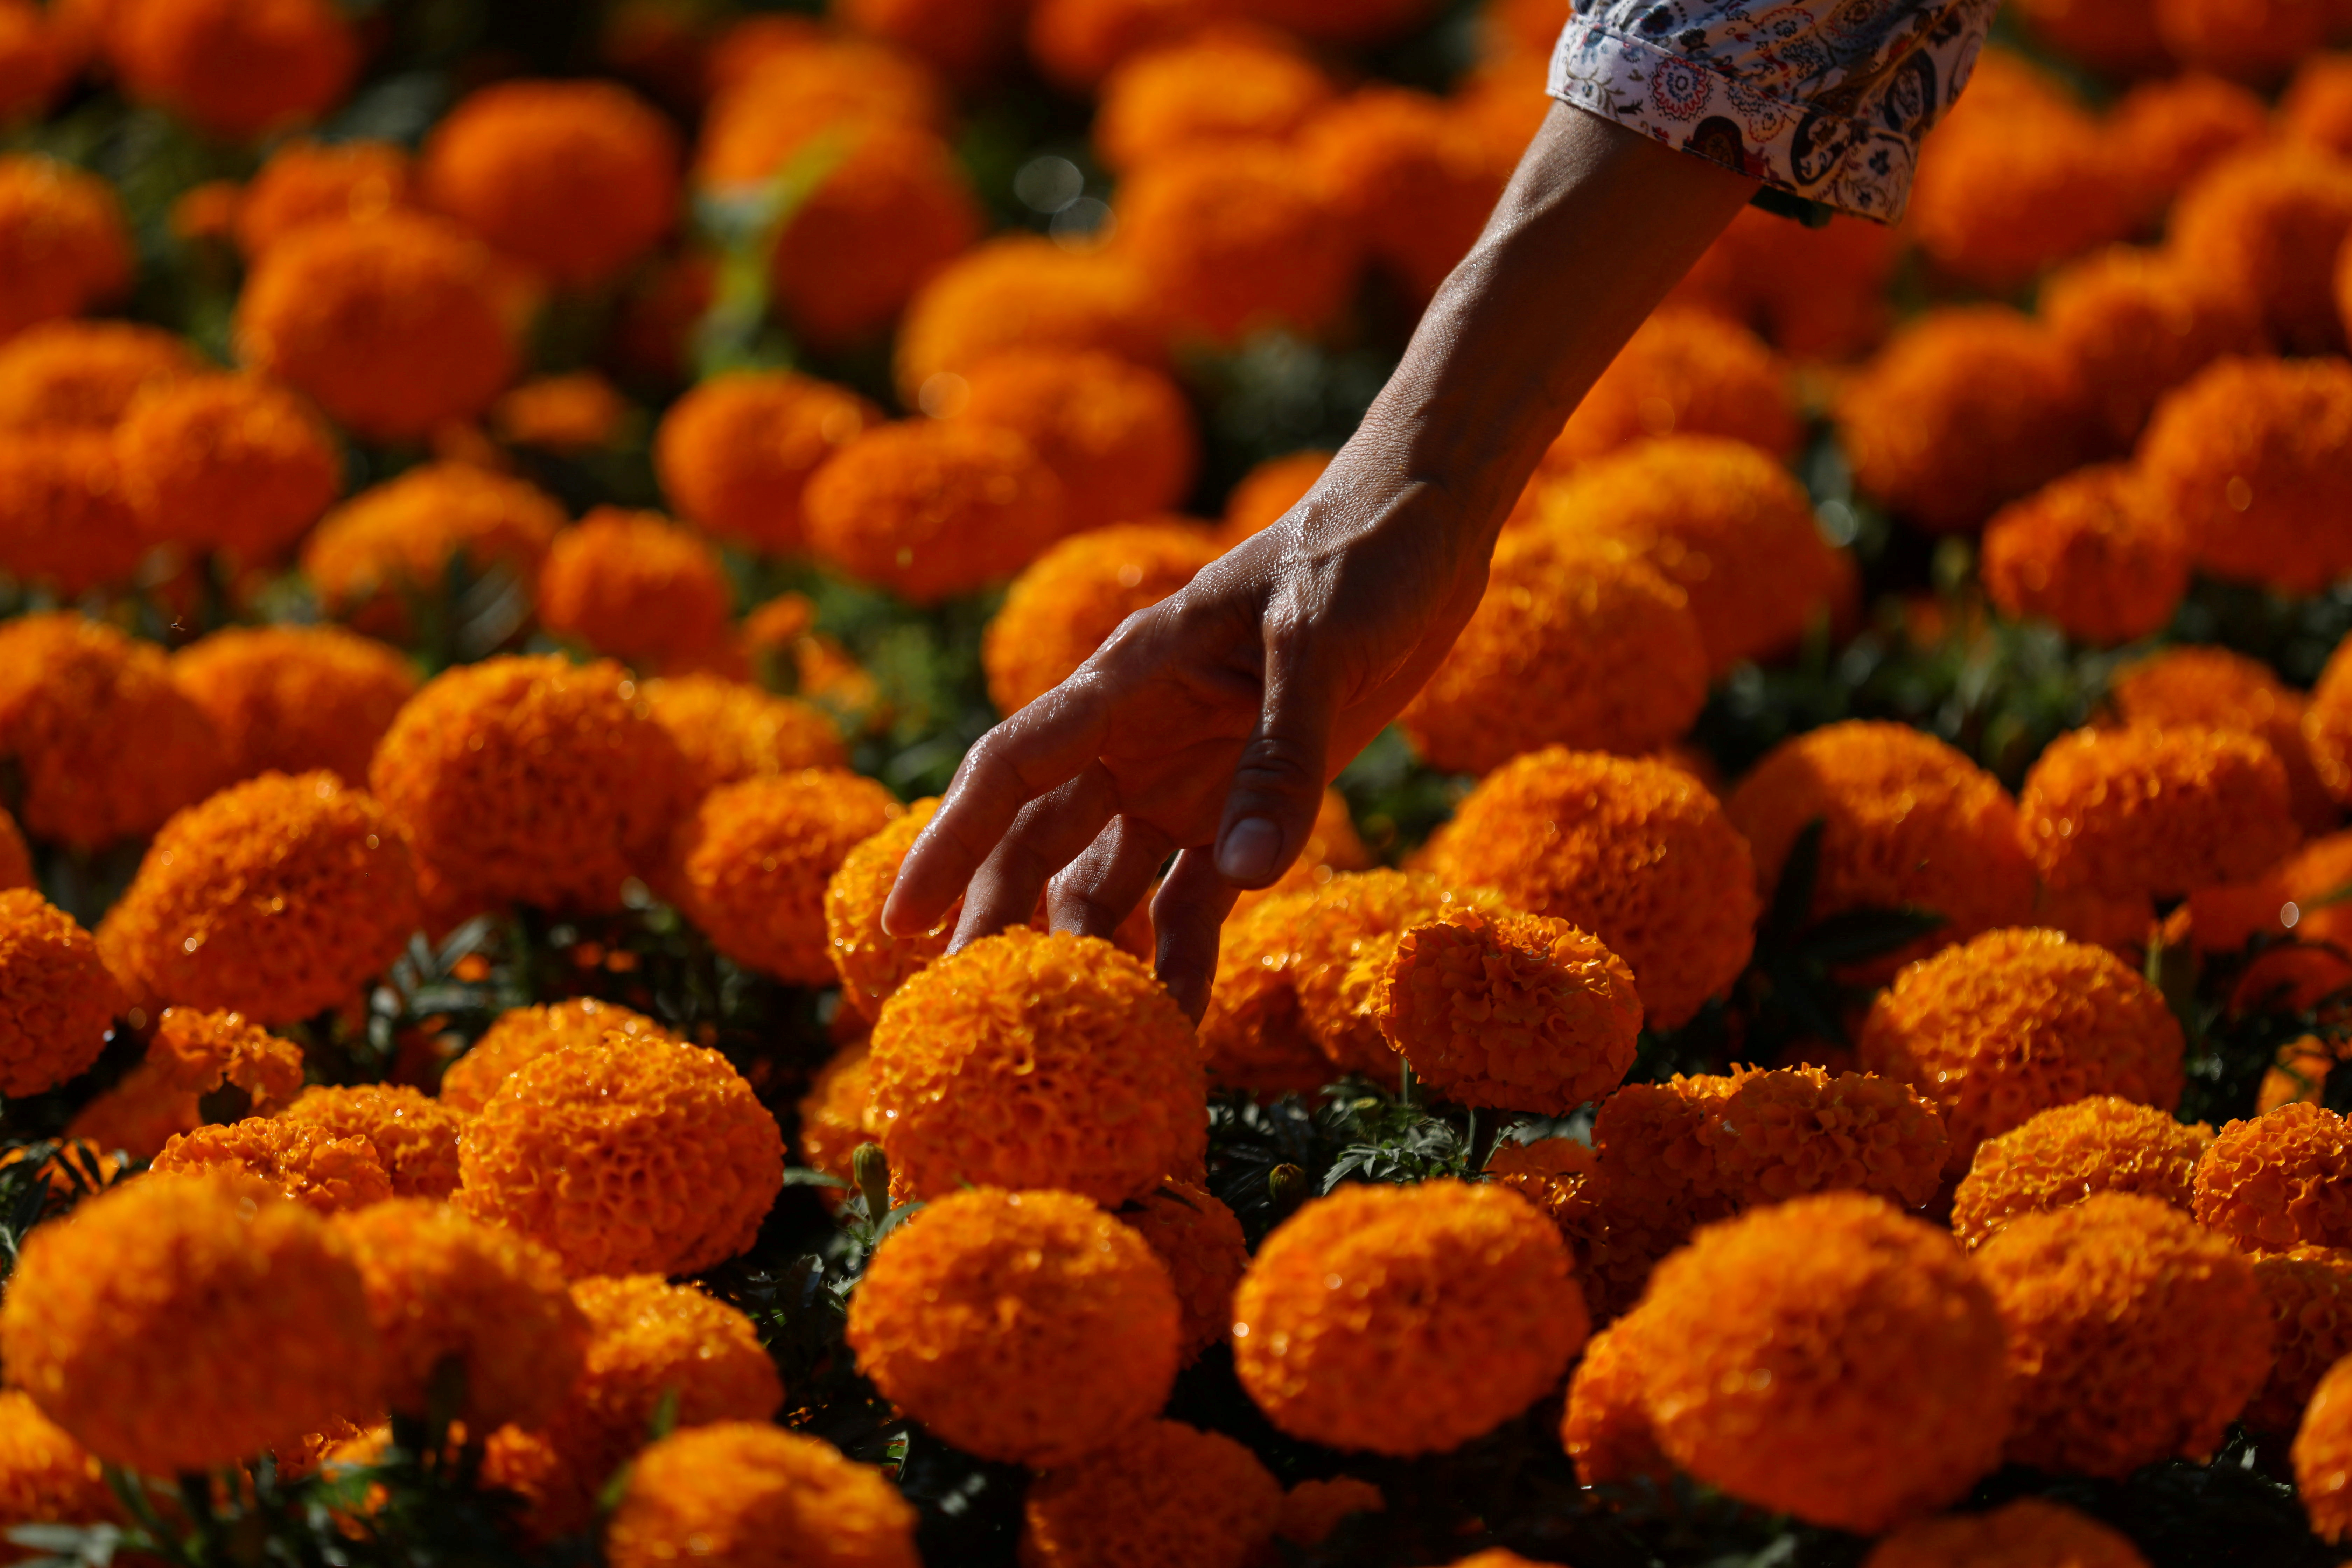 A woman collects Cempasuchil marigolds to be used during Mexico's Day of the Dead celebrations at San Luis Tlaxialtemalco nursery, in Xochimilco on the outskirts of Mexico City, Mexico October 28, 2021. REUTERS/Edgard Garrido/File Photo